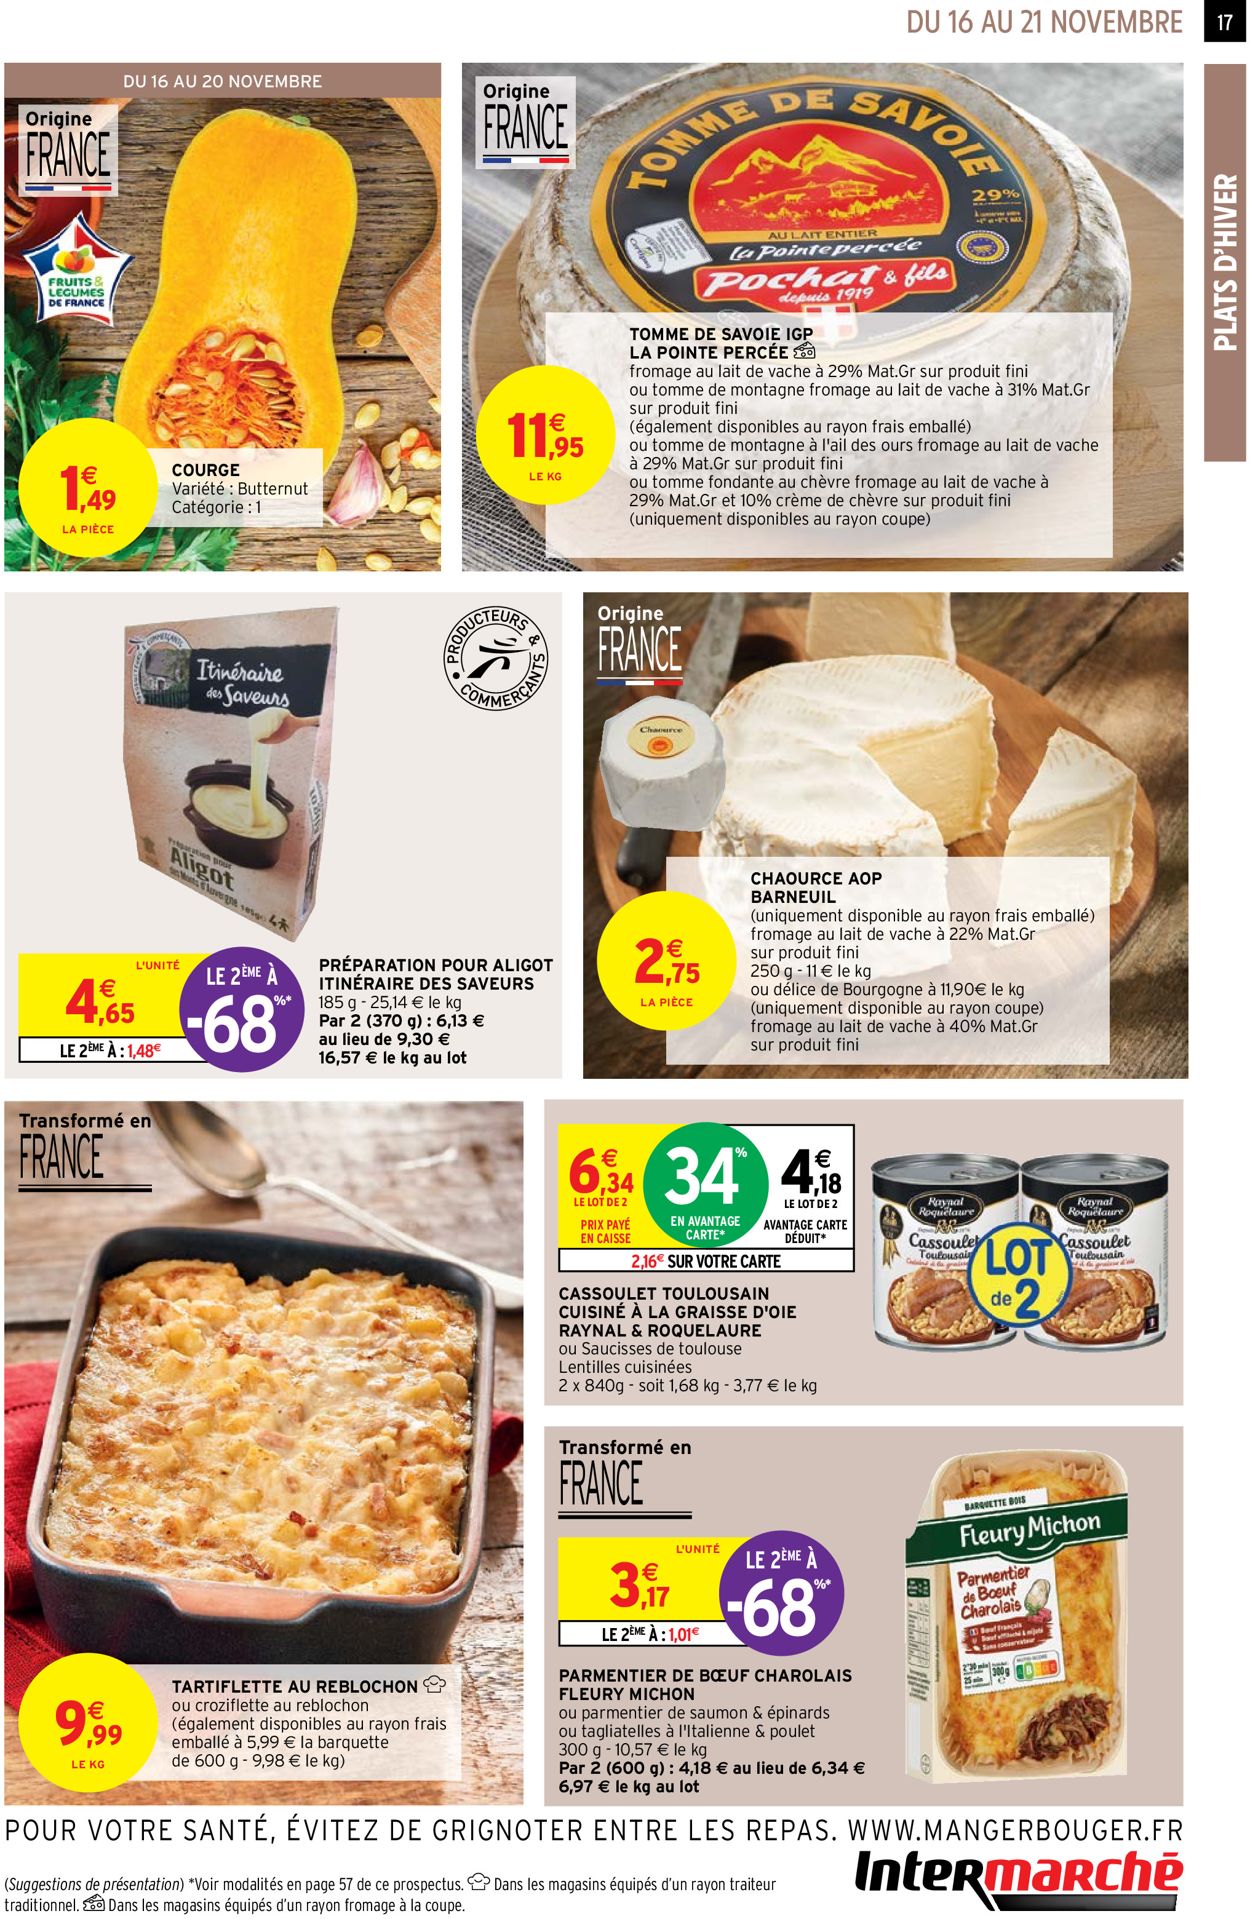 Intermarché  BLACK FRIDAY 2021 Catalogue - 16.11-21.11.2021 (Page 17)